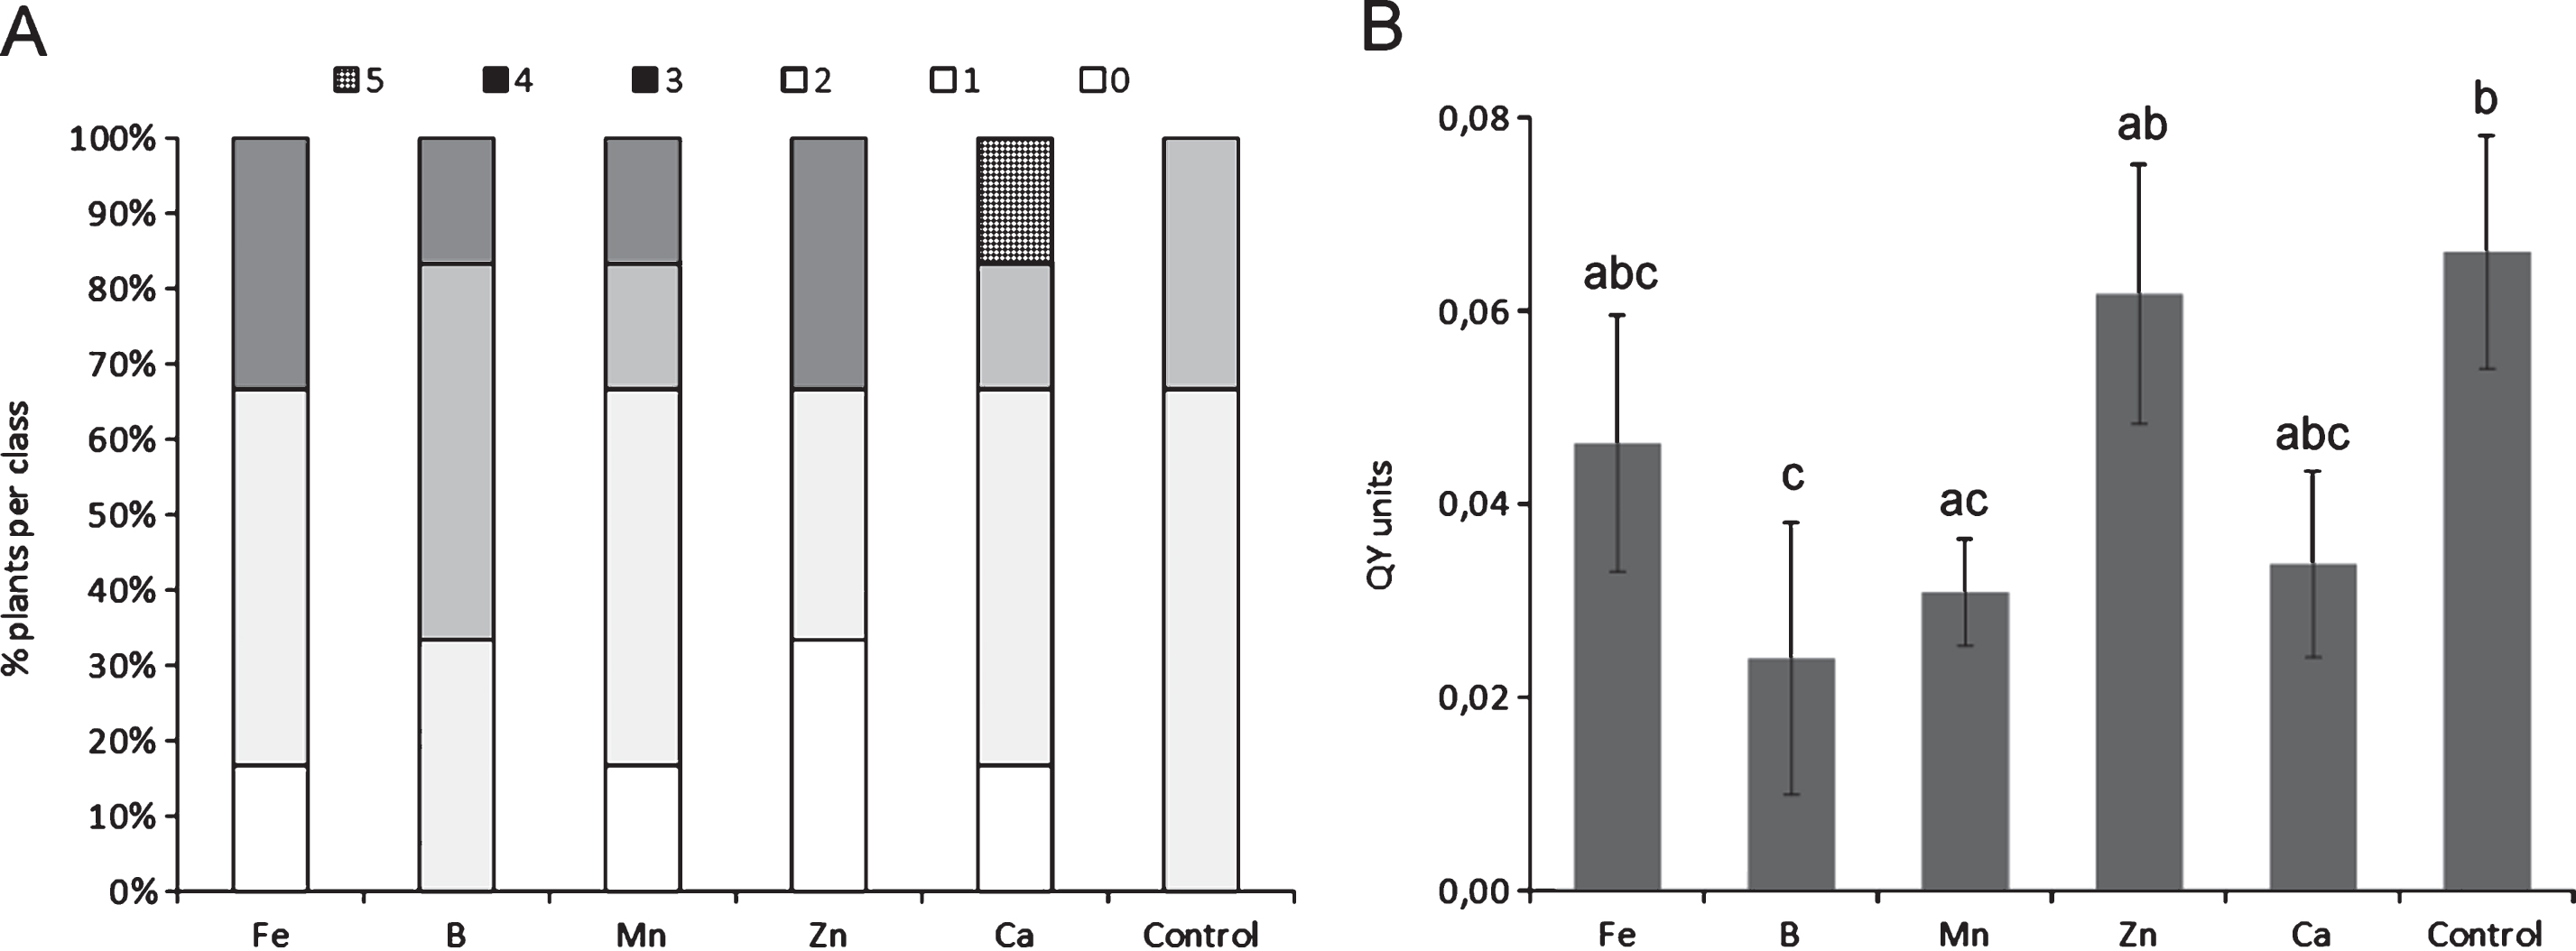 Influence of microelement excess on bacterial canker symptoms development (A) and photosynthetic quantum yield (B), one month after inoculation. Different letters indicate significant differences according to Fisher’s LSD test (P < 0.05).